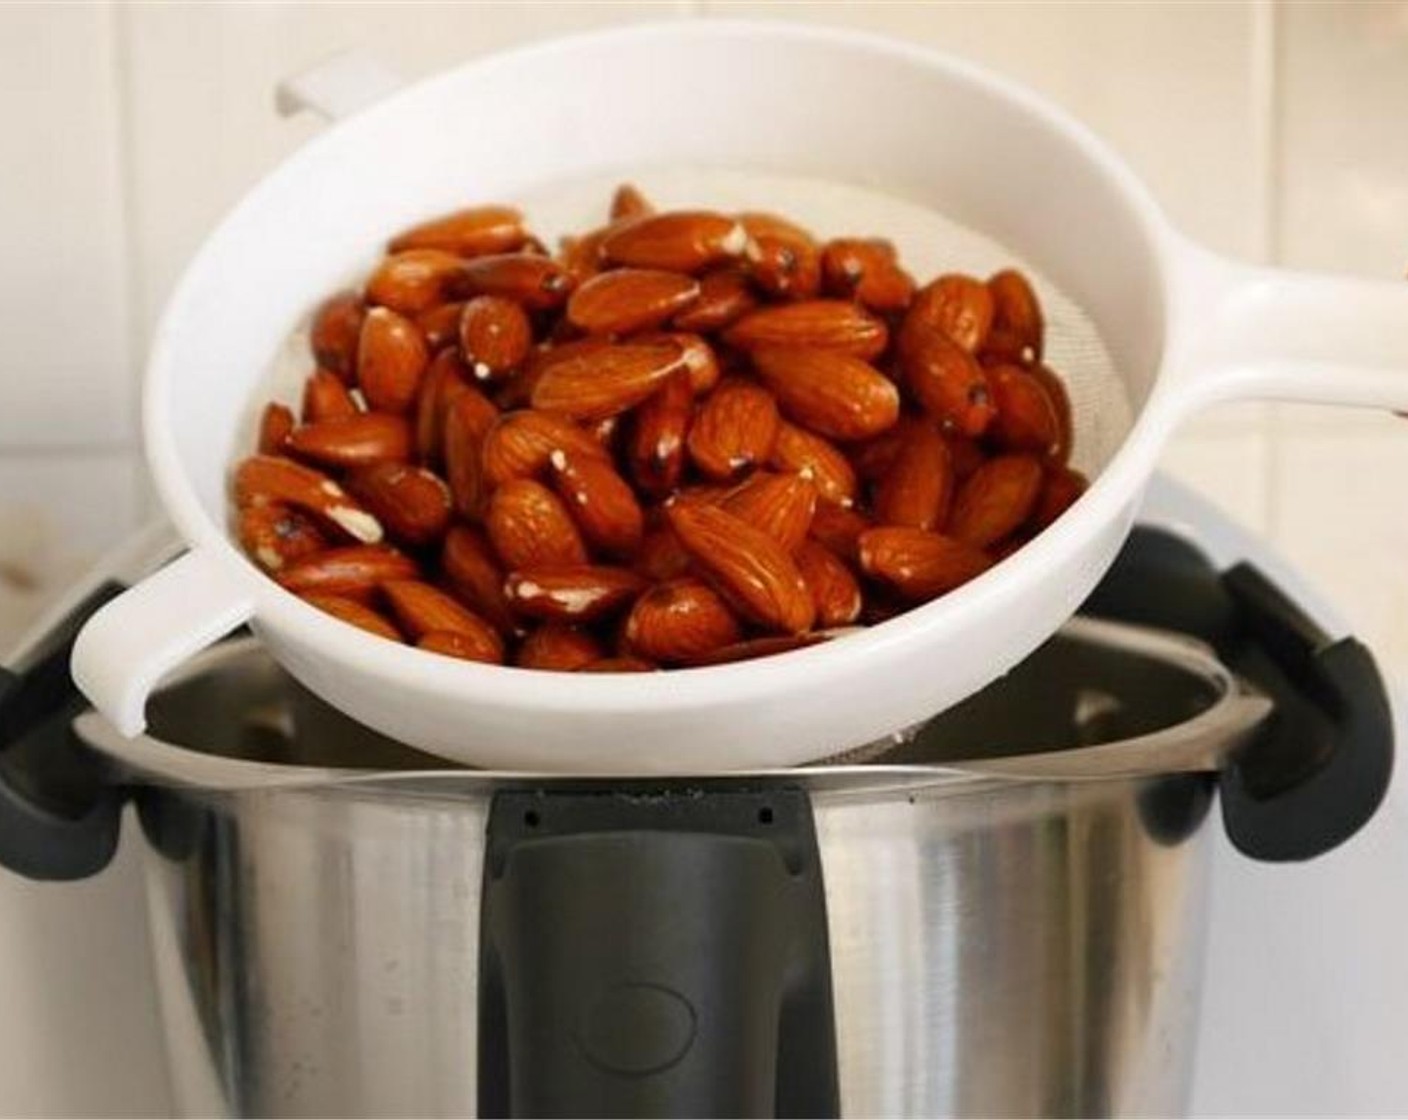 step 2 Next day drain the almonds and place them in a blender of food processor with the Water (3 cups), Vanilla Extract (1/4 tsp), and Medjool Dates (3).